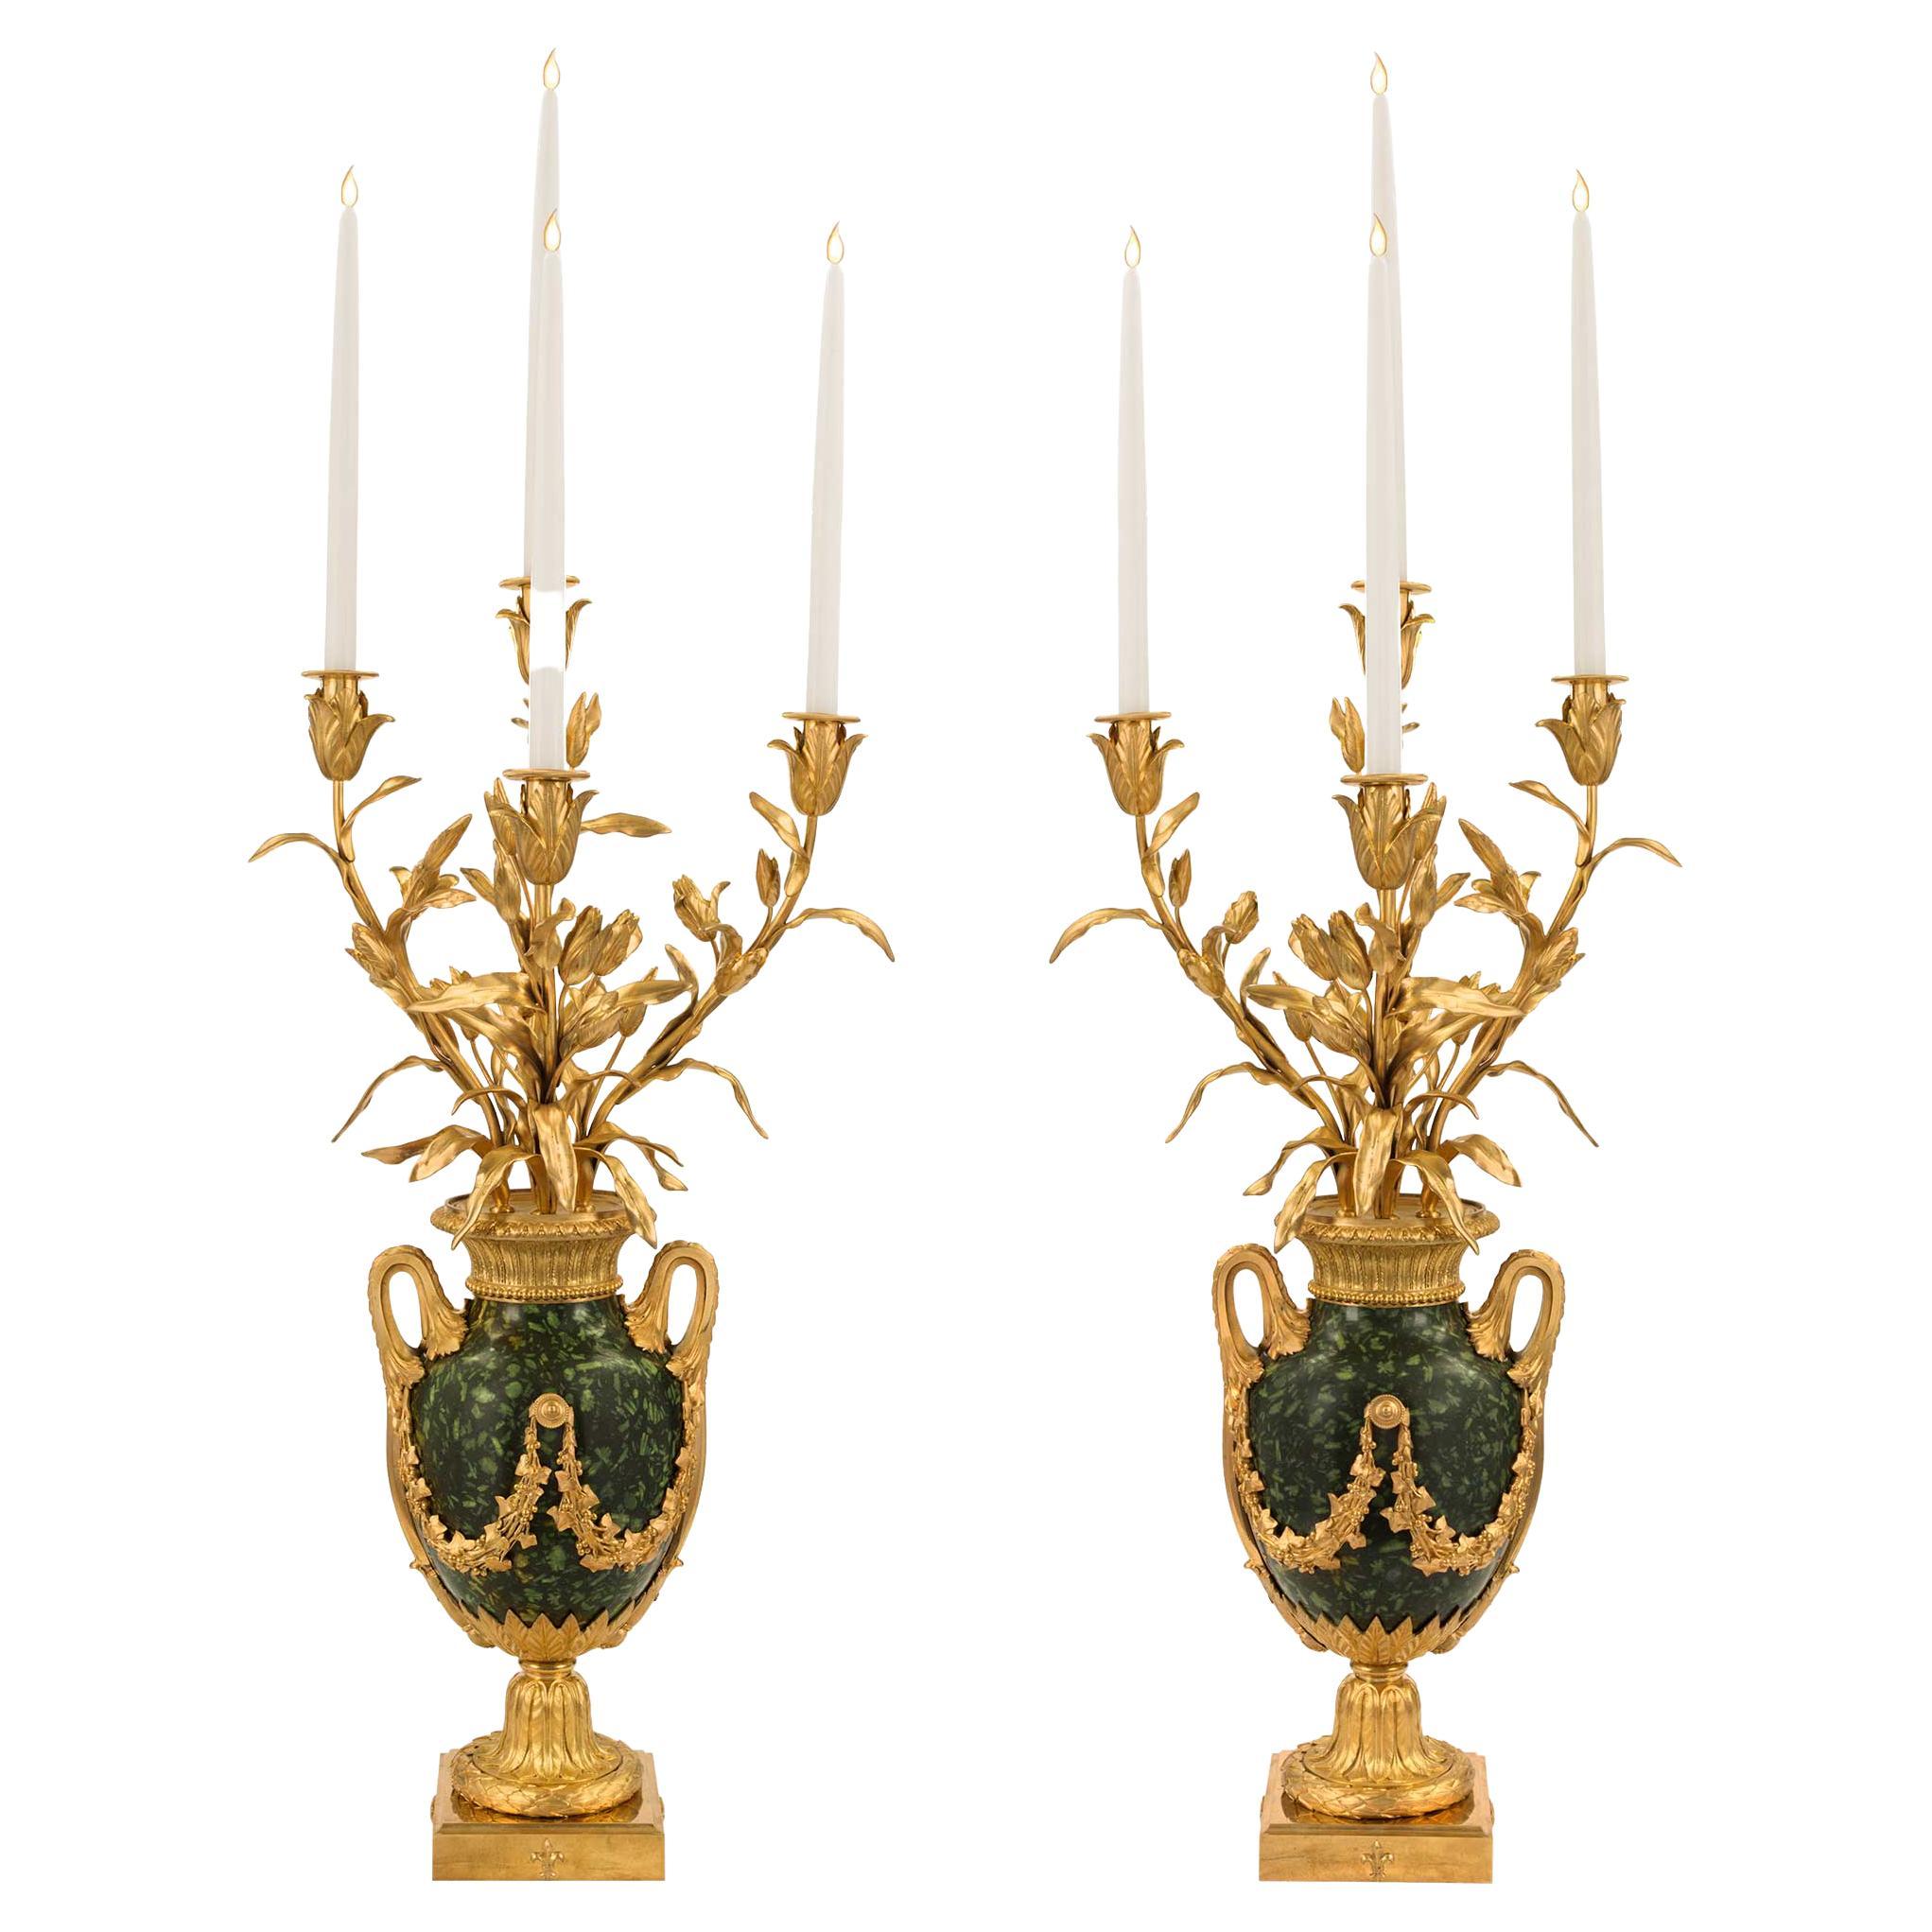 Pair of French 19th Century Louis XVI Style Four-Arm Candelabras For Sale